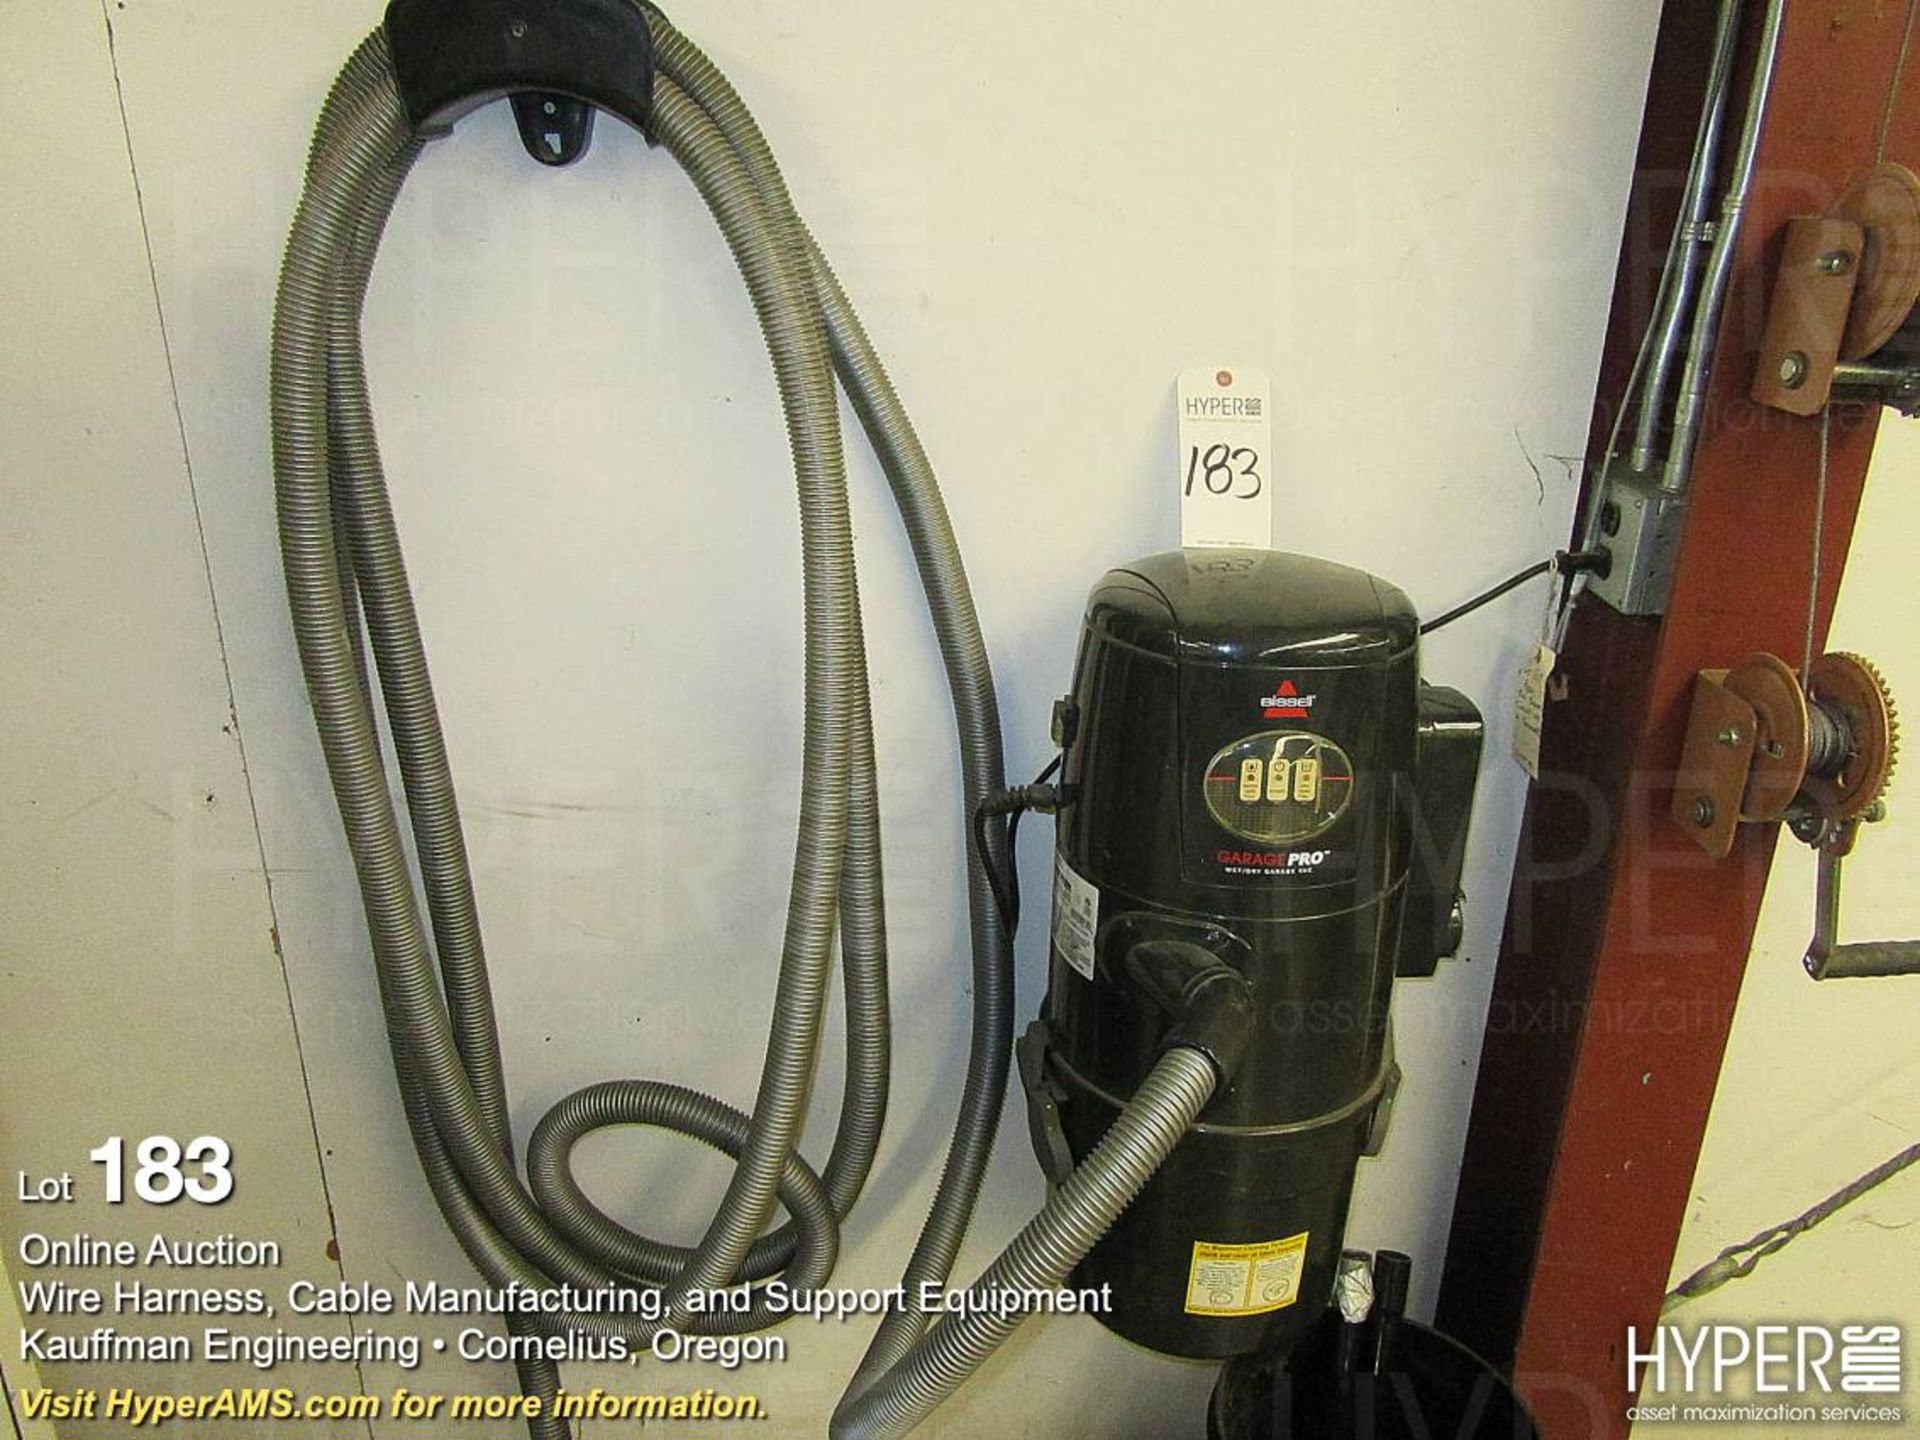 Bissell Garage Pro wall mounted wet/dry vacuum